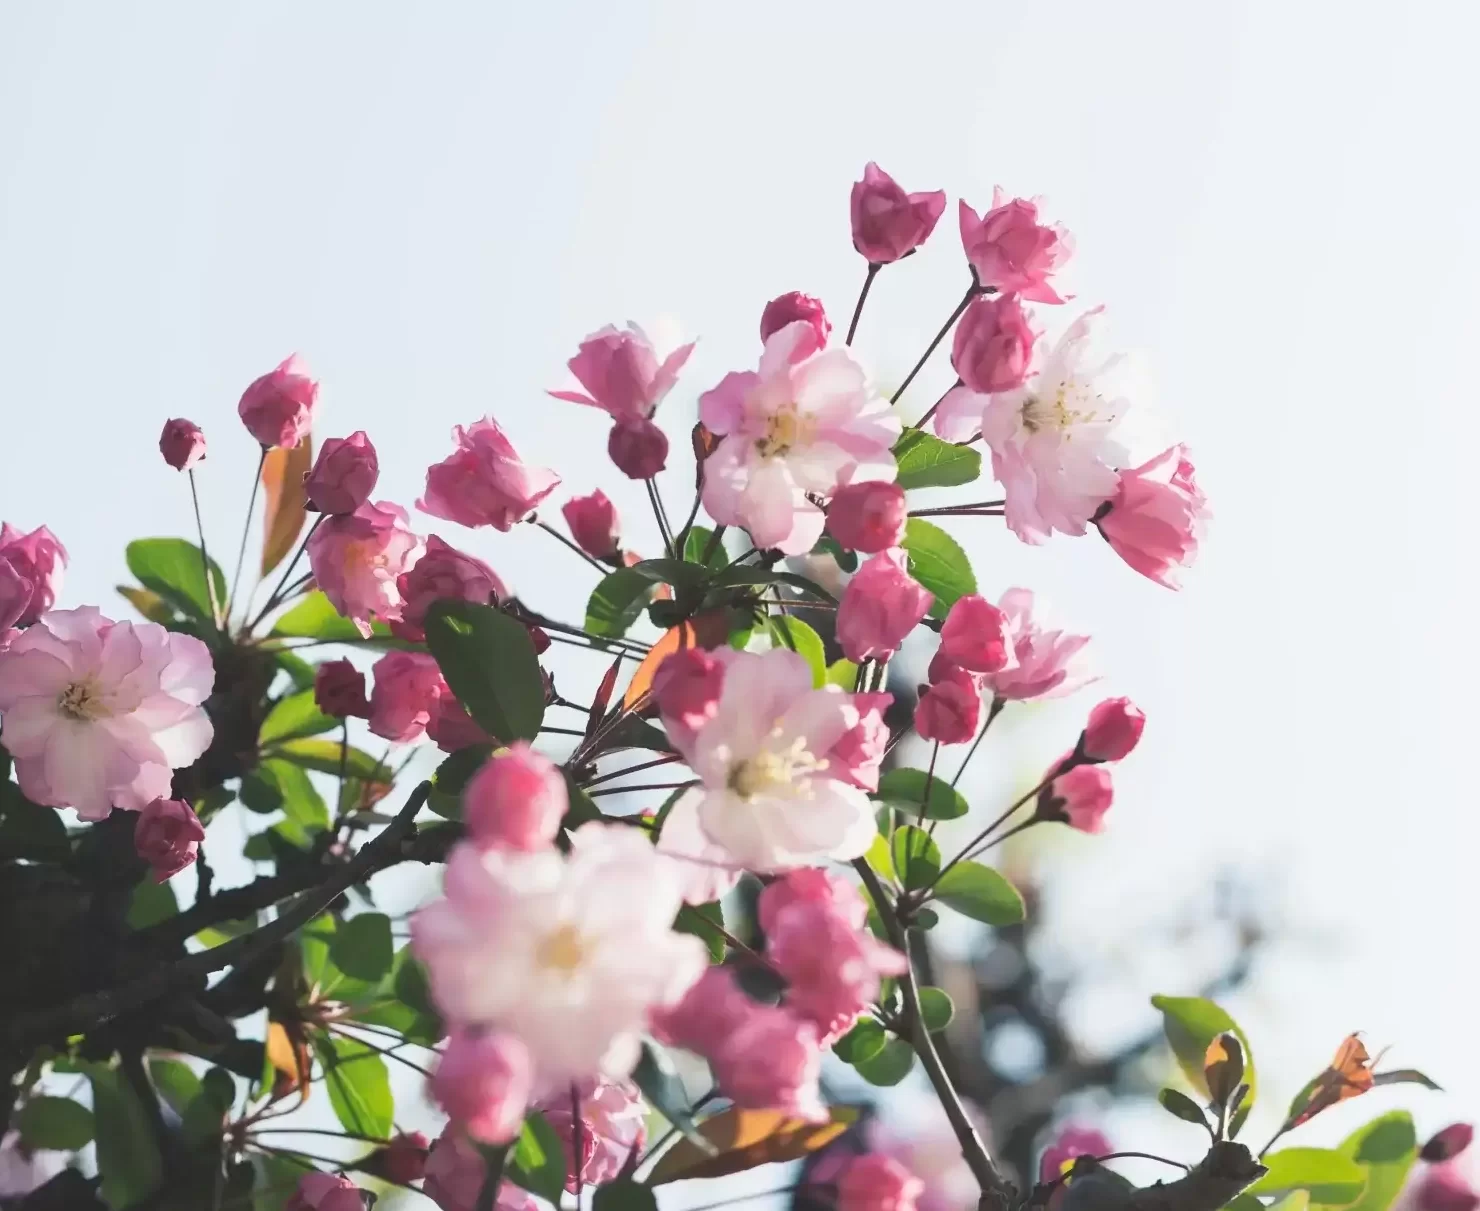 Spring Flowers to Romanticize Your Life